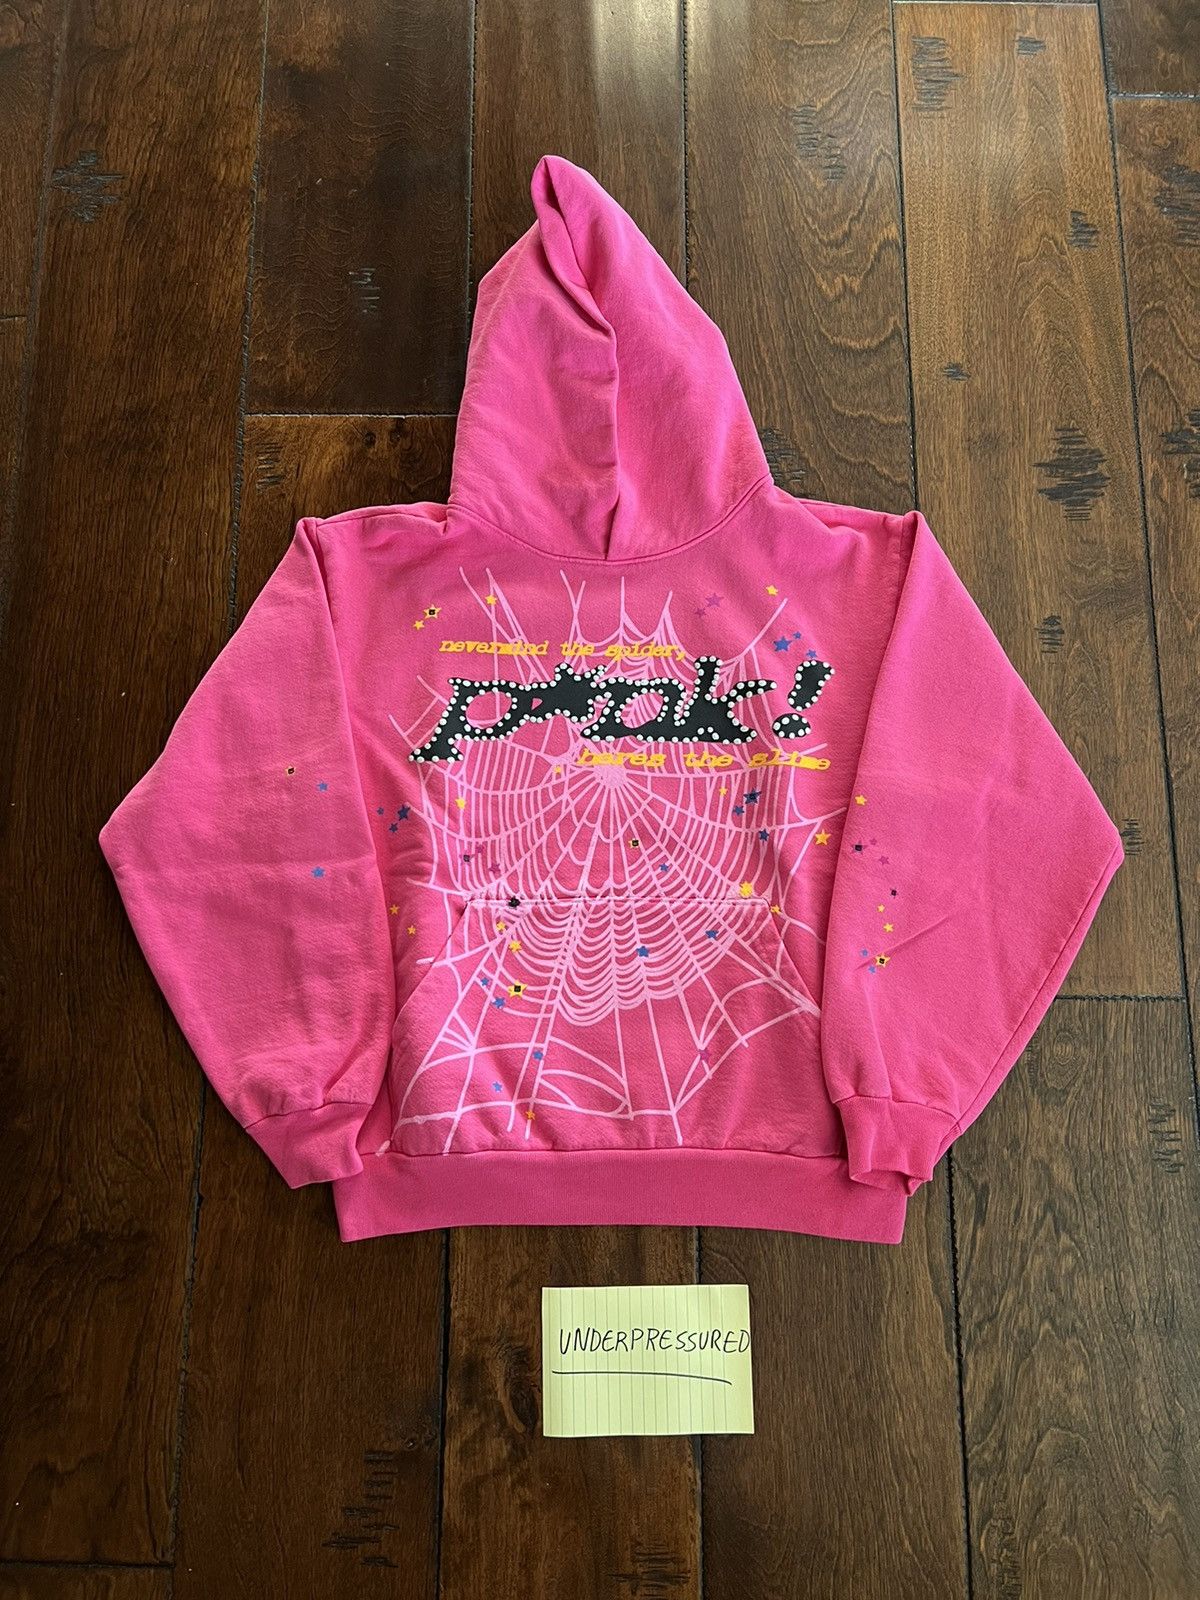 Spider Worldwide NEW** SPIDER WORLDWIDE PINK PUNK HOODIE SMALL Size US S / EU 44-46 / 1 - 1 Preview